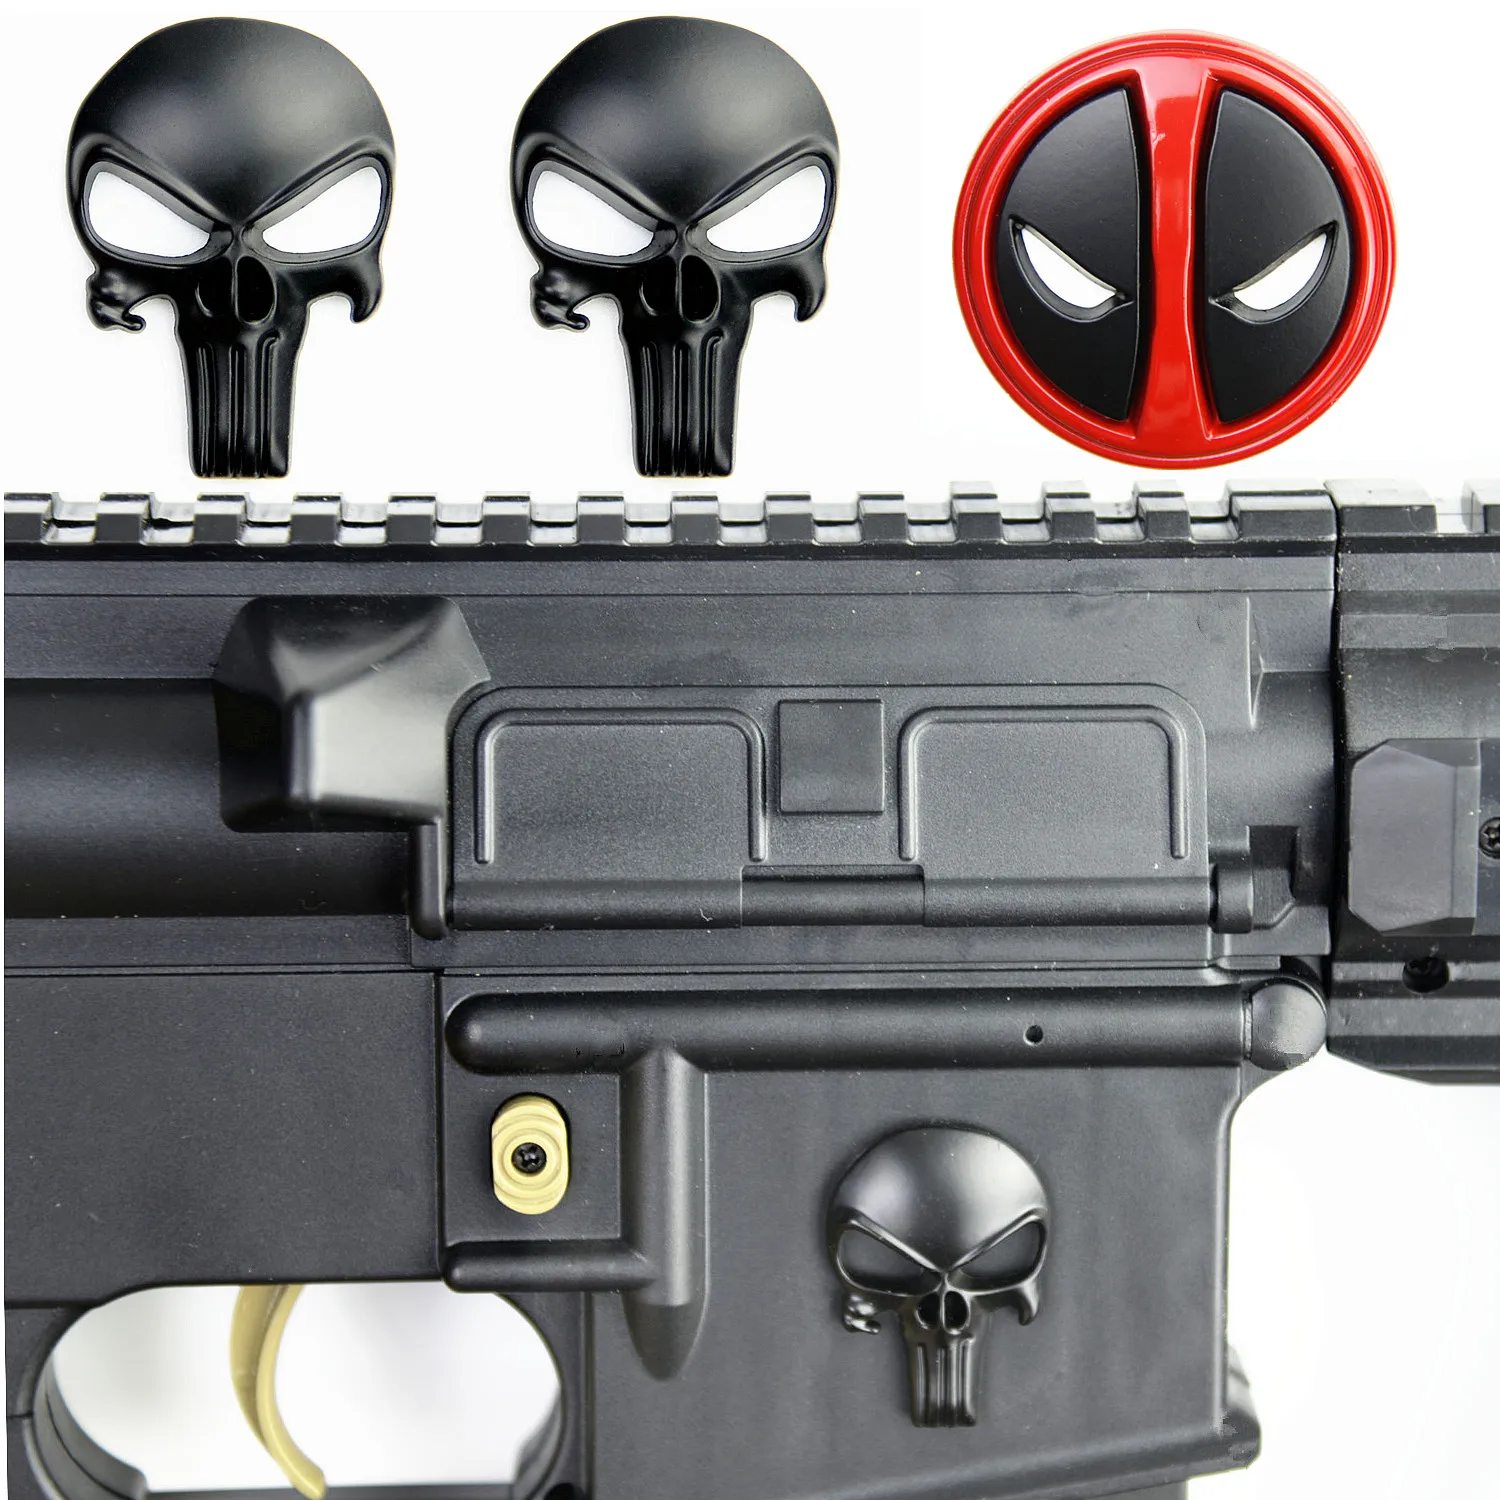 

3D Punisher Skull Deadpool Magwell Metal Decal Badge Sticker for AR15 AK47 M4 M16 Airsoft Rifle Pistol Gun Hunting Accessories